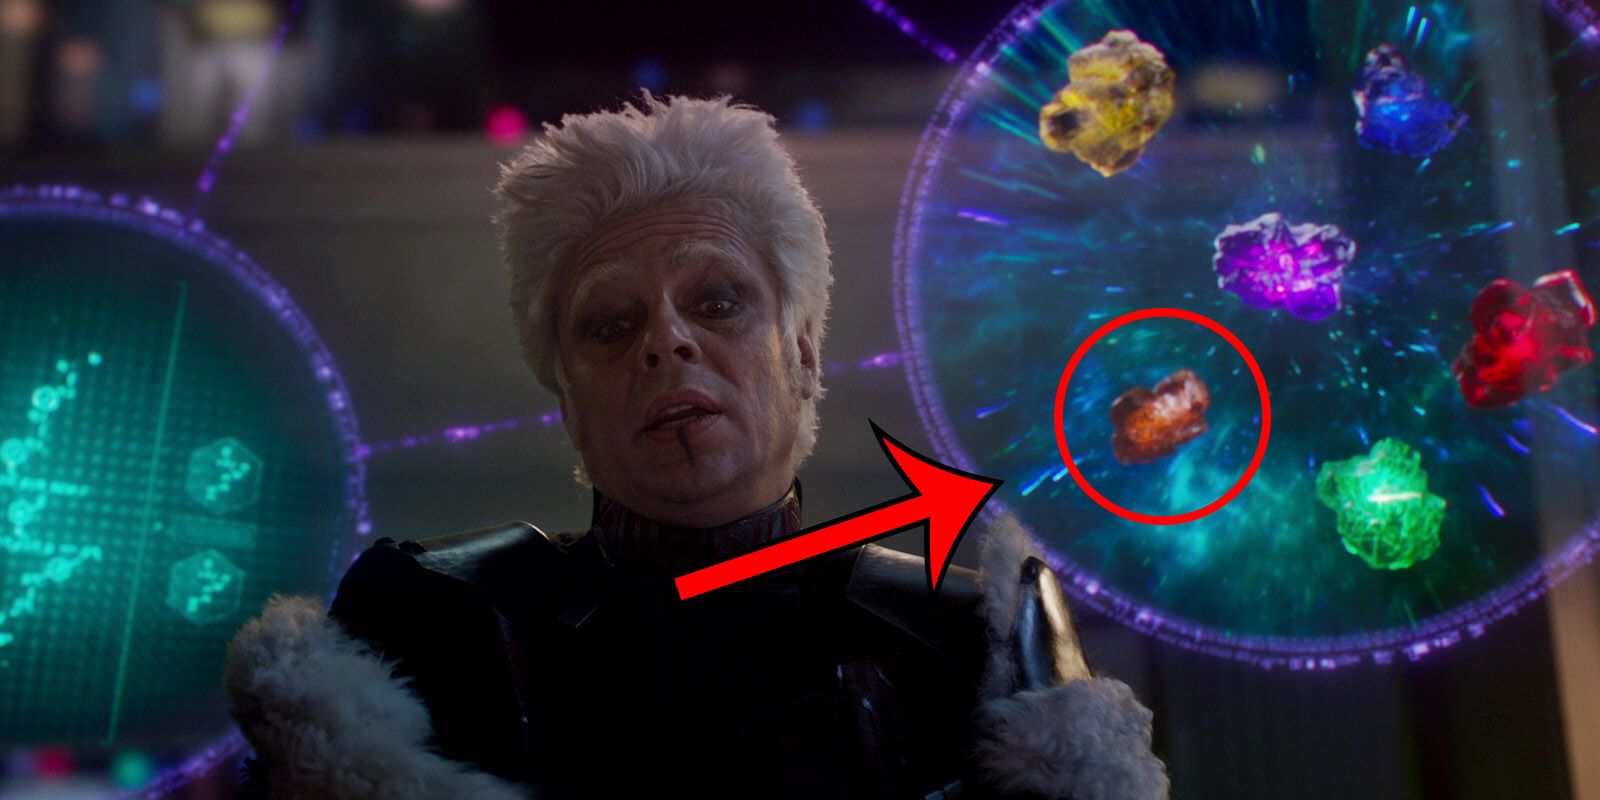 About That Last Infinity Stone... [Potential Spoilers]